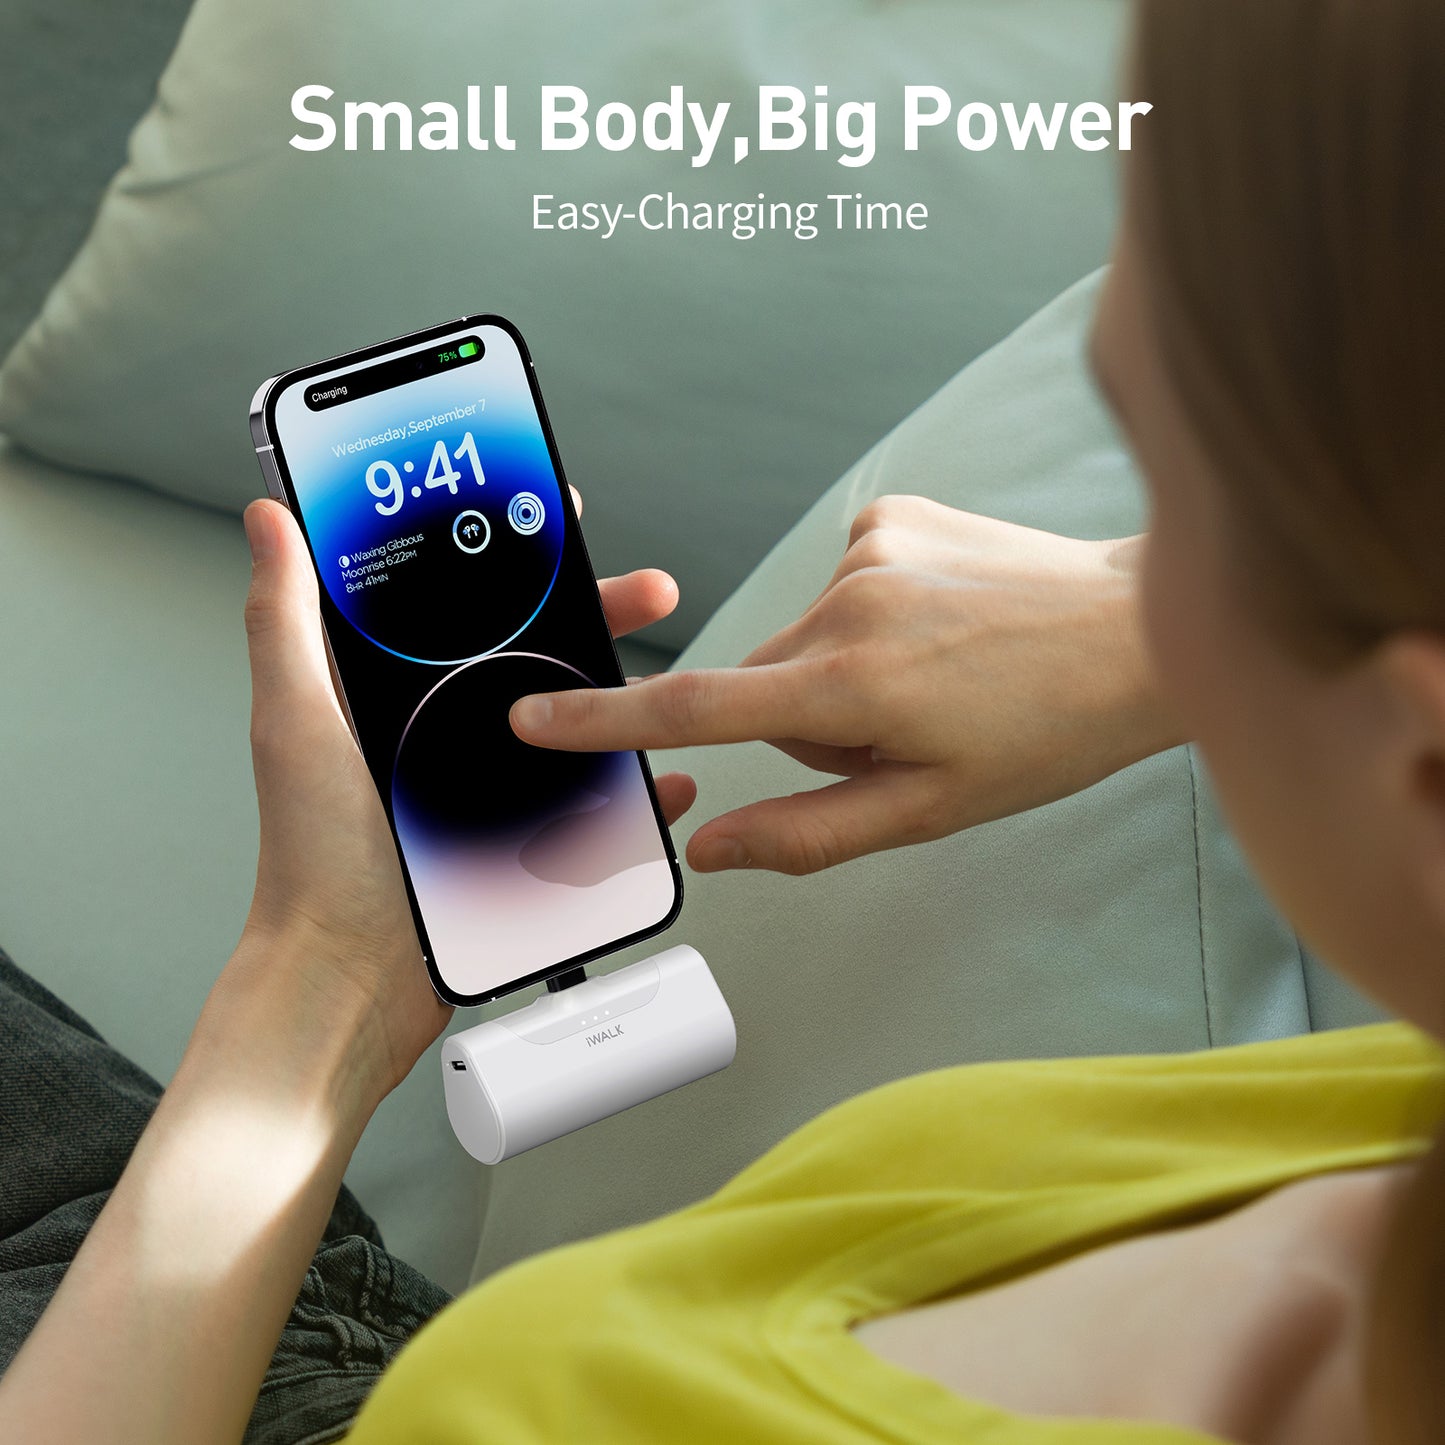 iWALK LinkPod 4 | 4500mAh Pocket Size Cute Portable Charger [Built-In Lightning Connector]